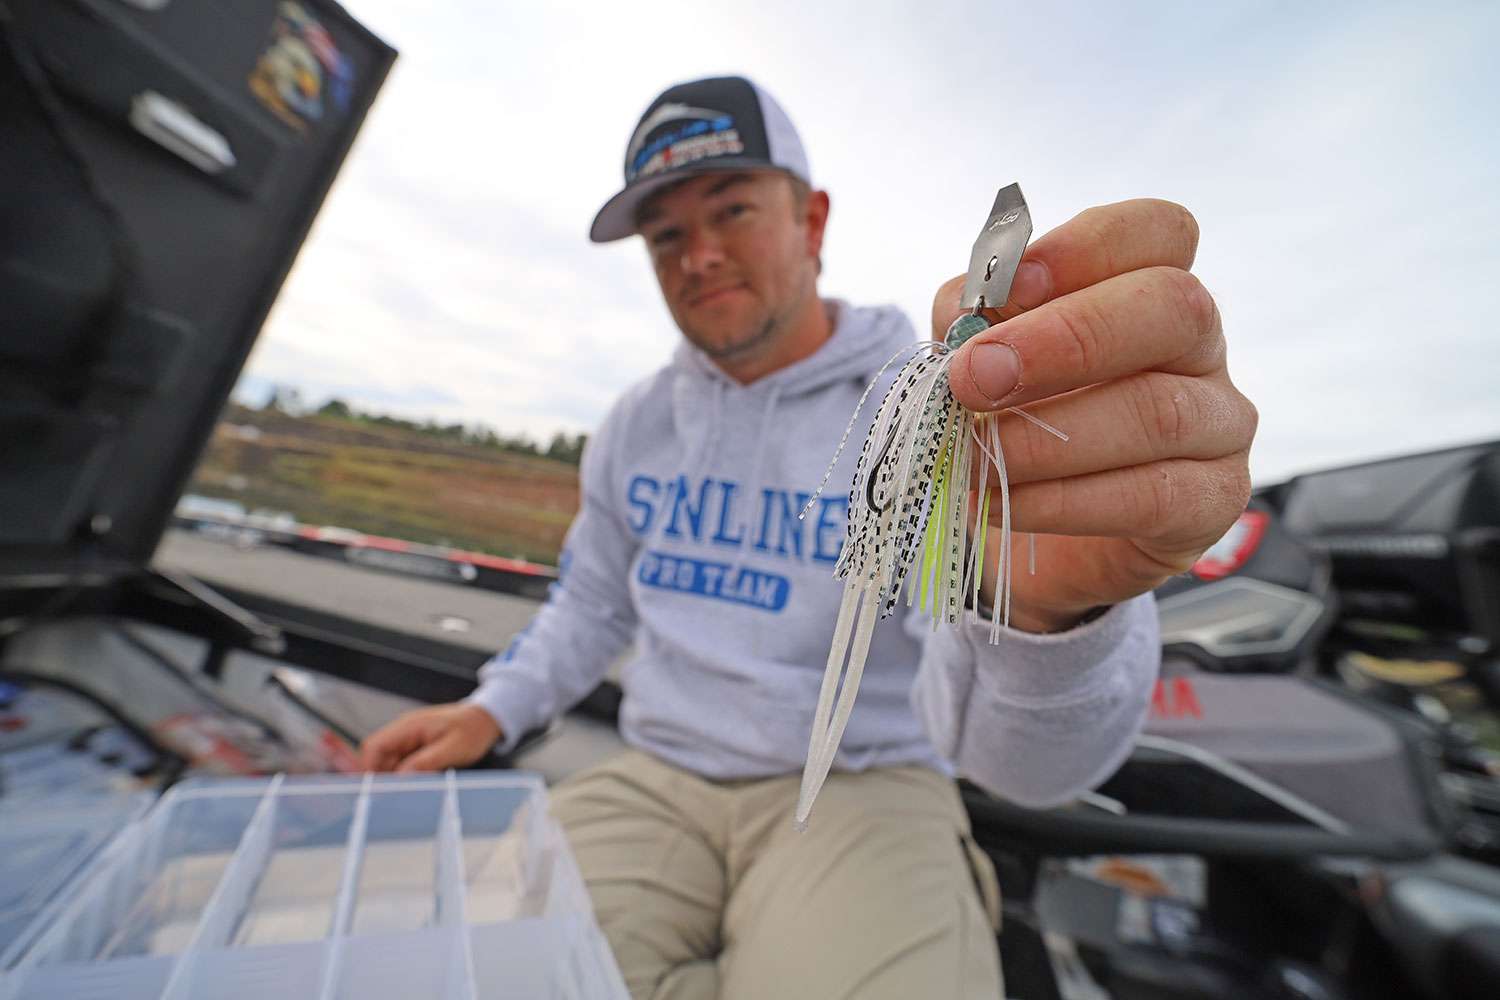 A ChatterBait is a go-to for the young angler, and for good reason.